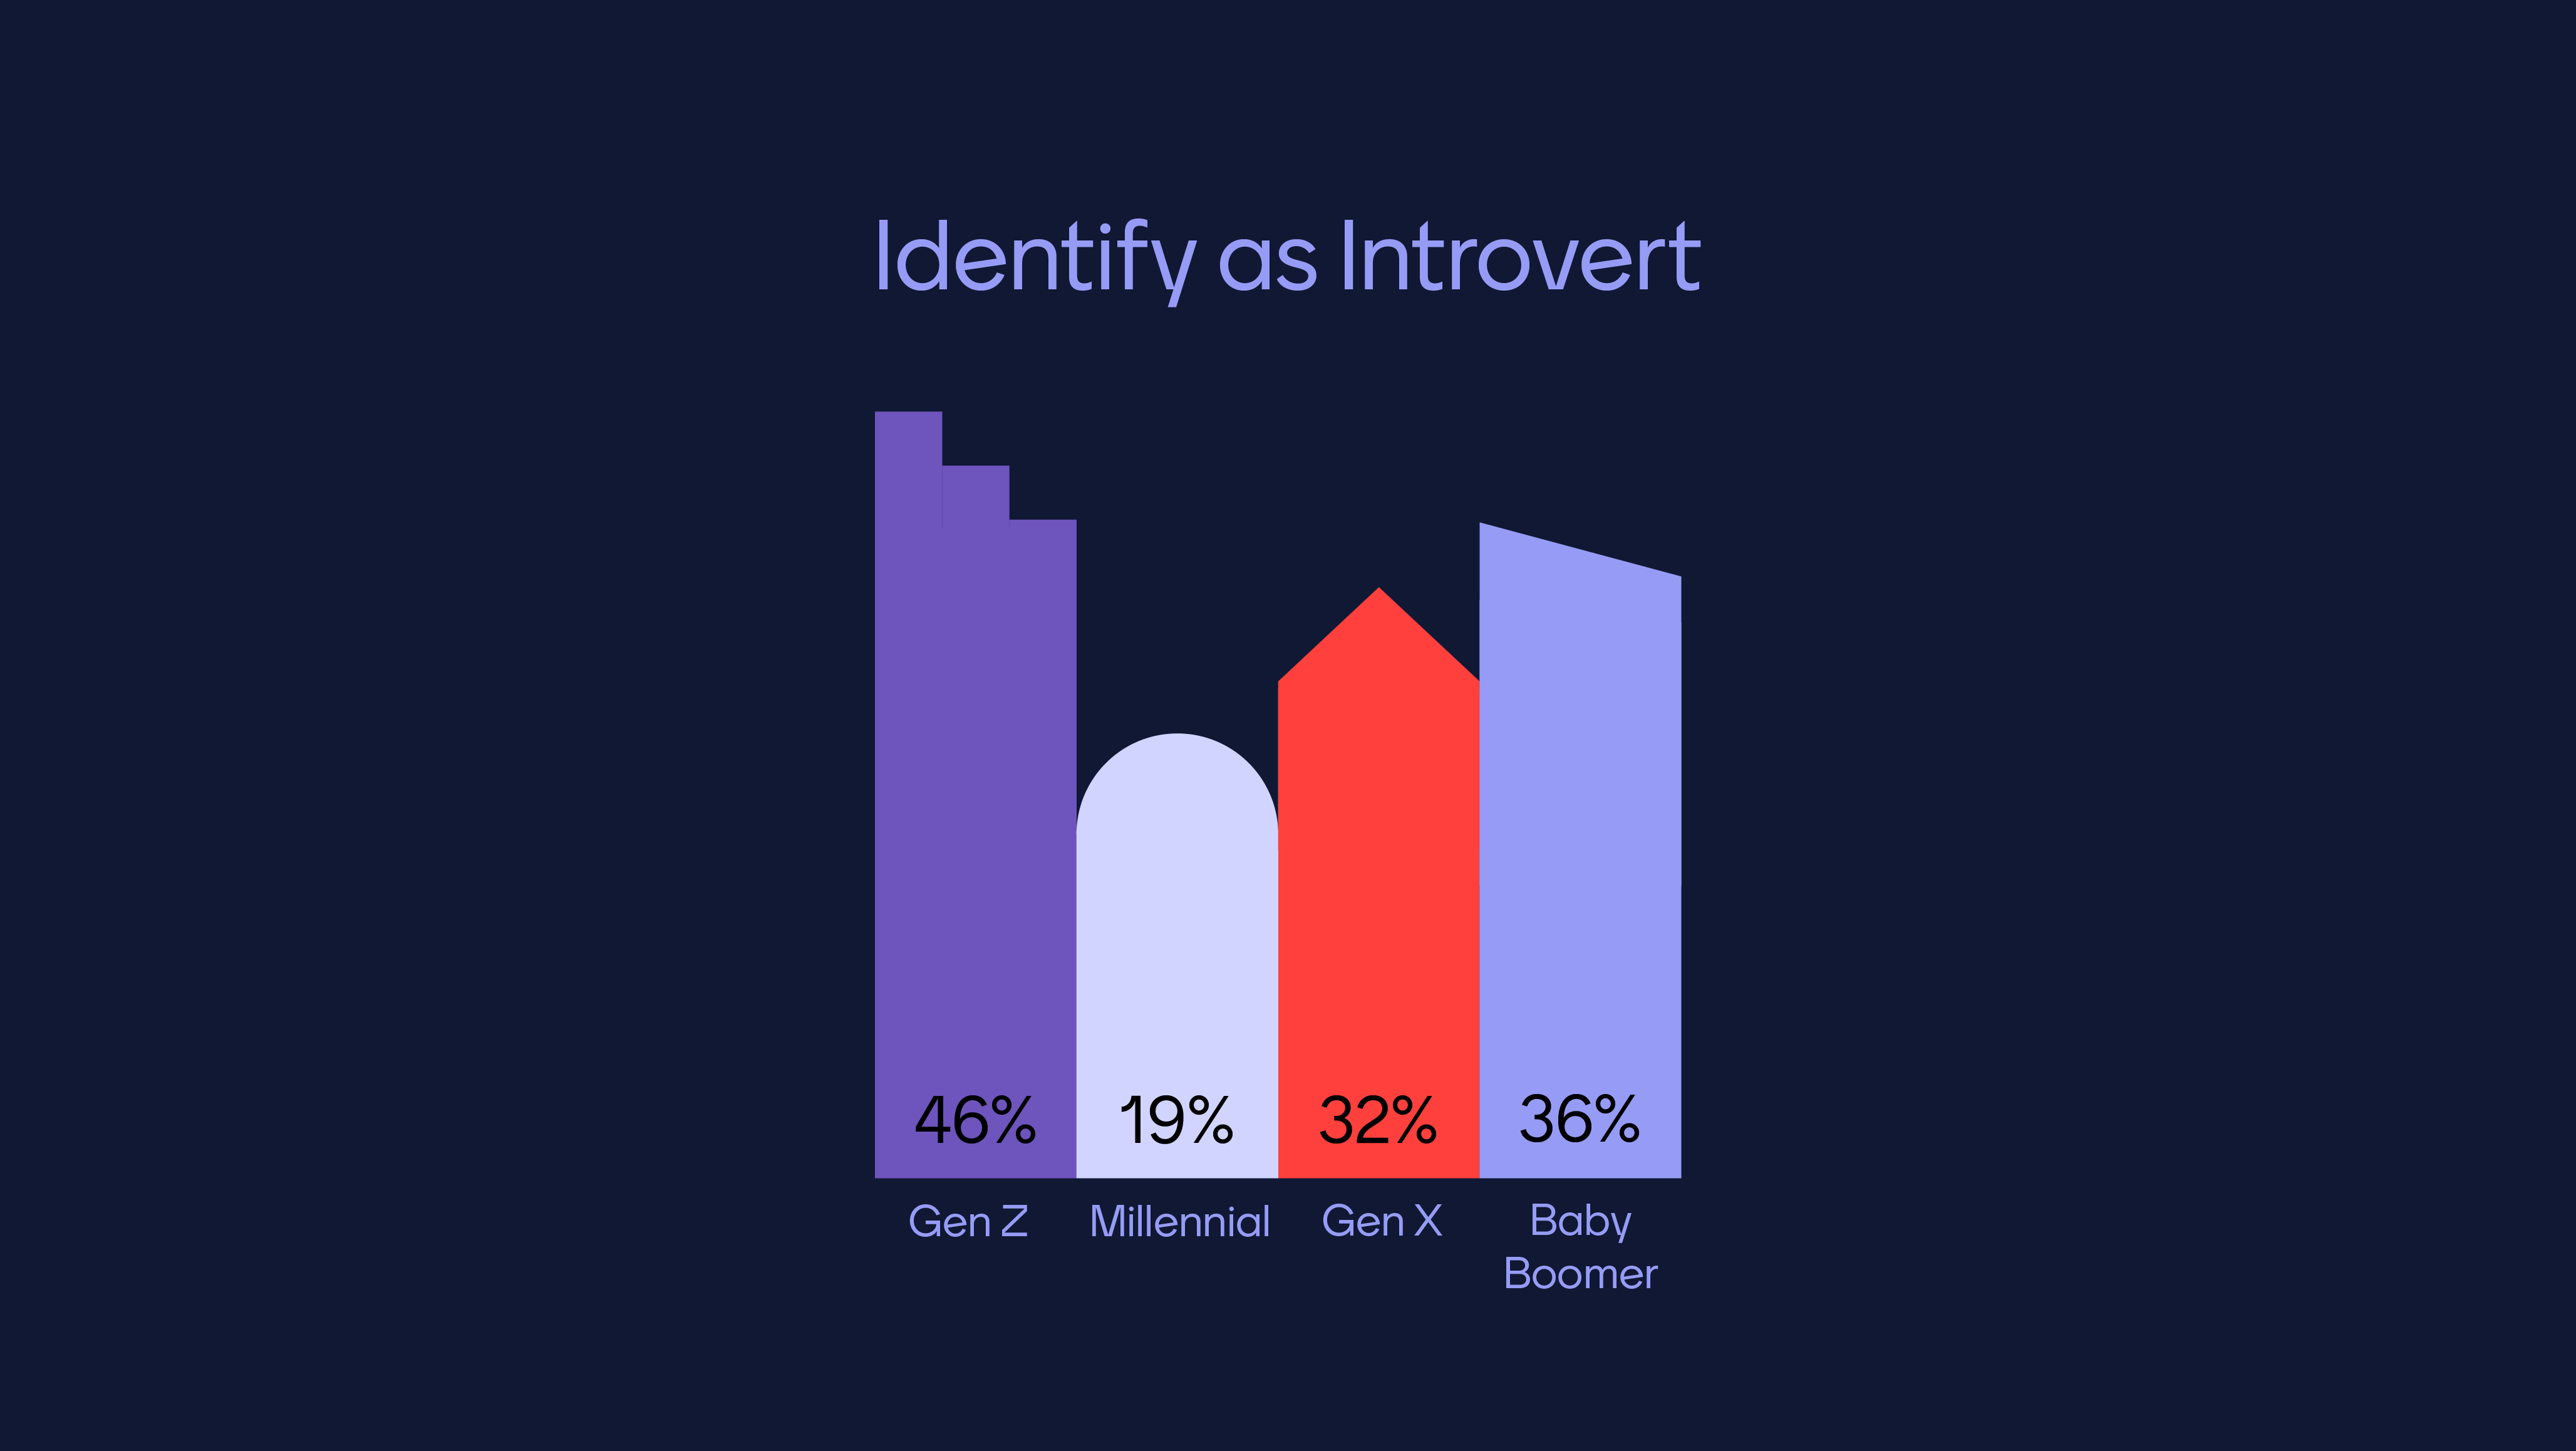 A statistic of what percentage of generations identify as introverts. 46% of gen Z, 19% of millennials, 32% of gen X, 36% of Baby boomers.